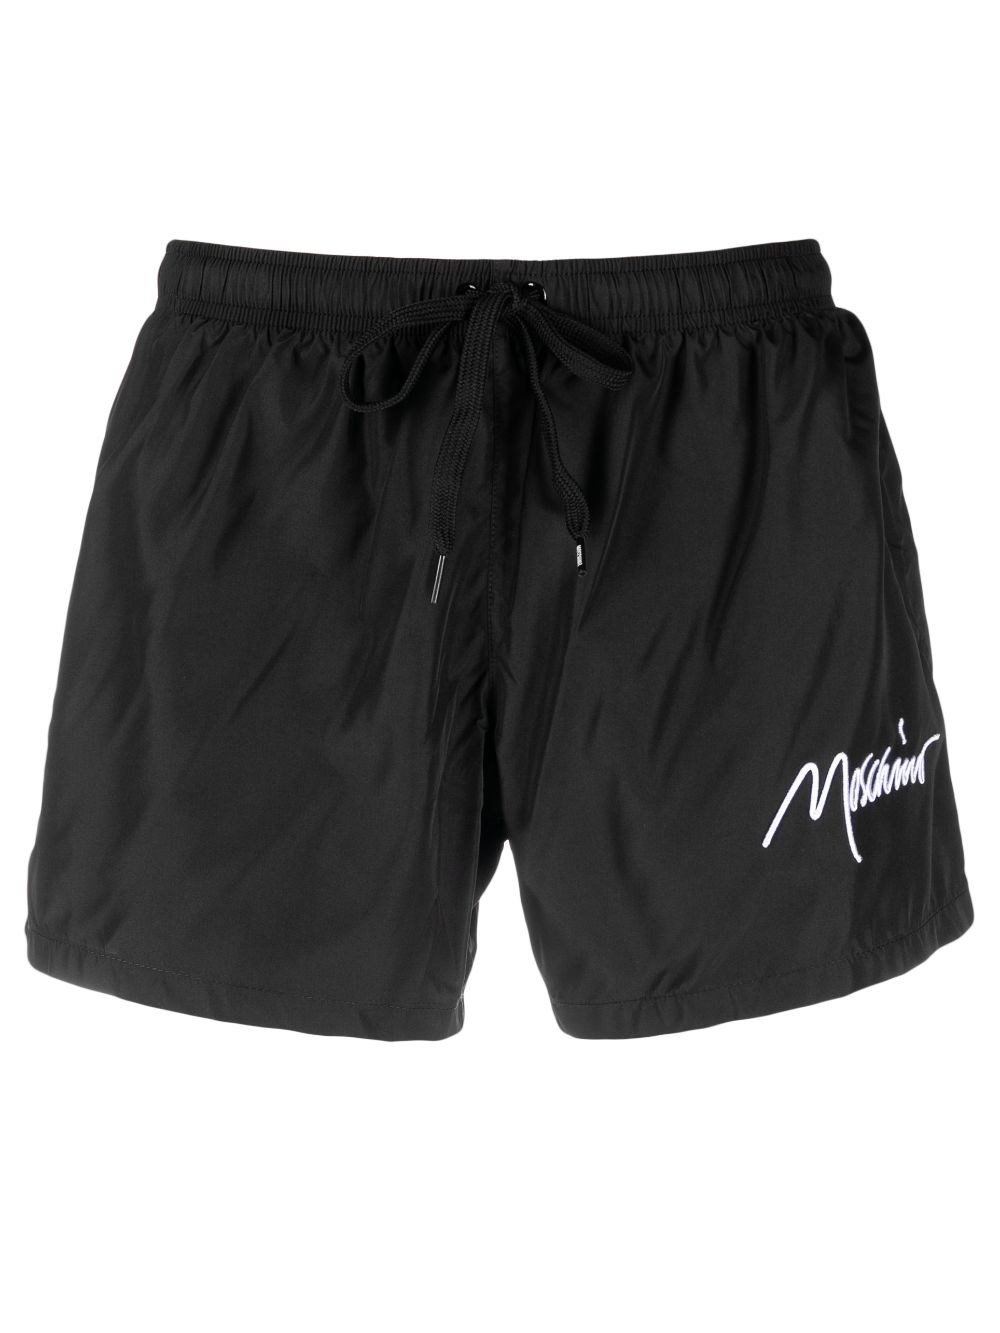 Moschino Beach Shorts With Print In ブラック